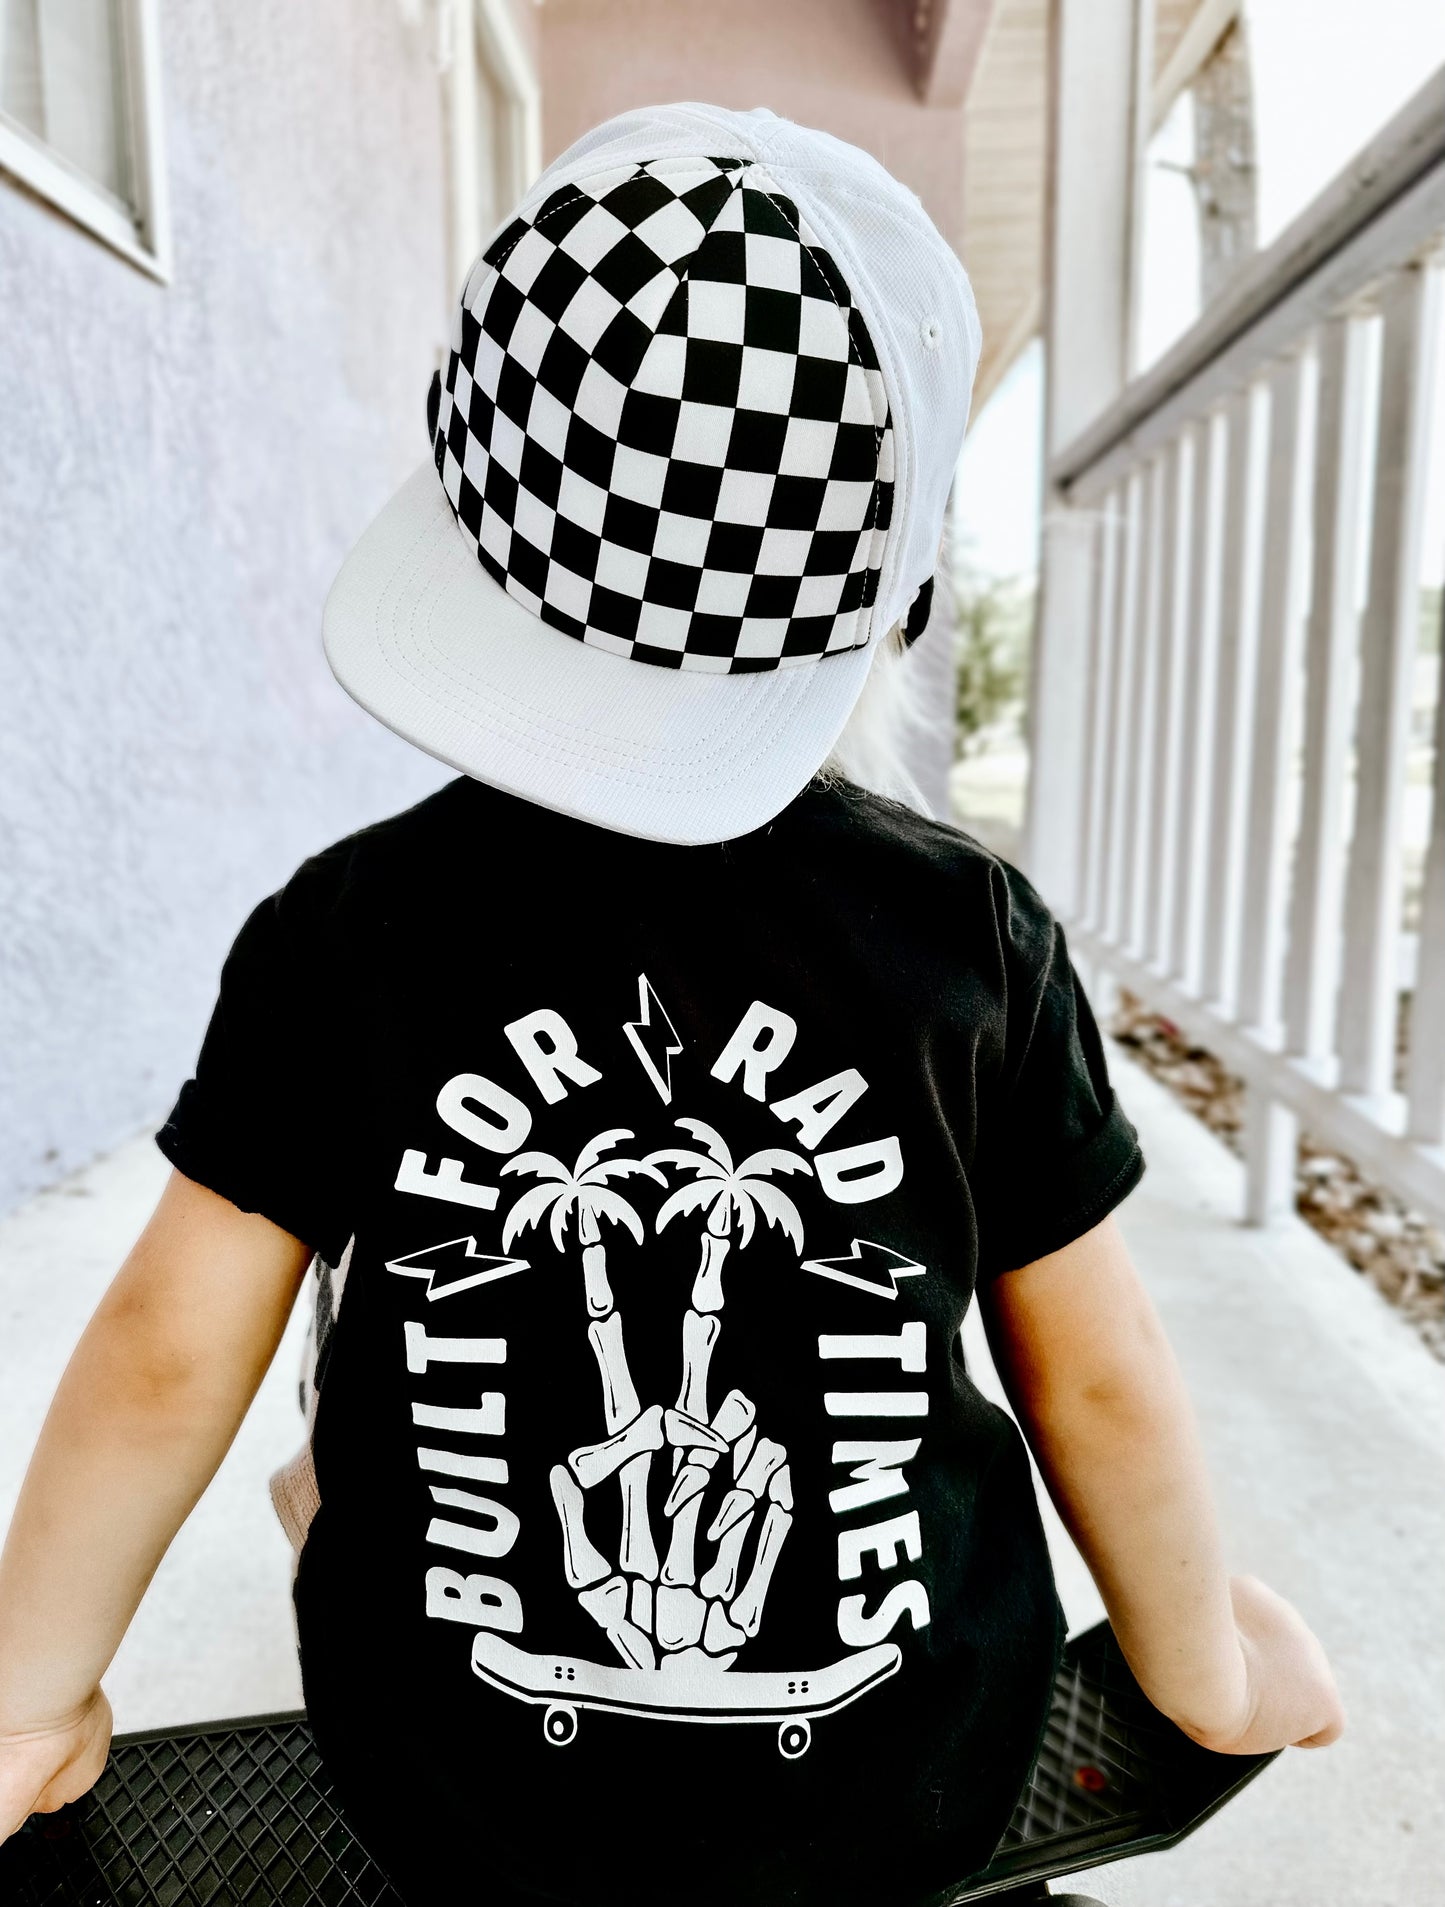 Built for Rad Times Tee or Onesie